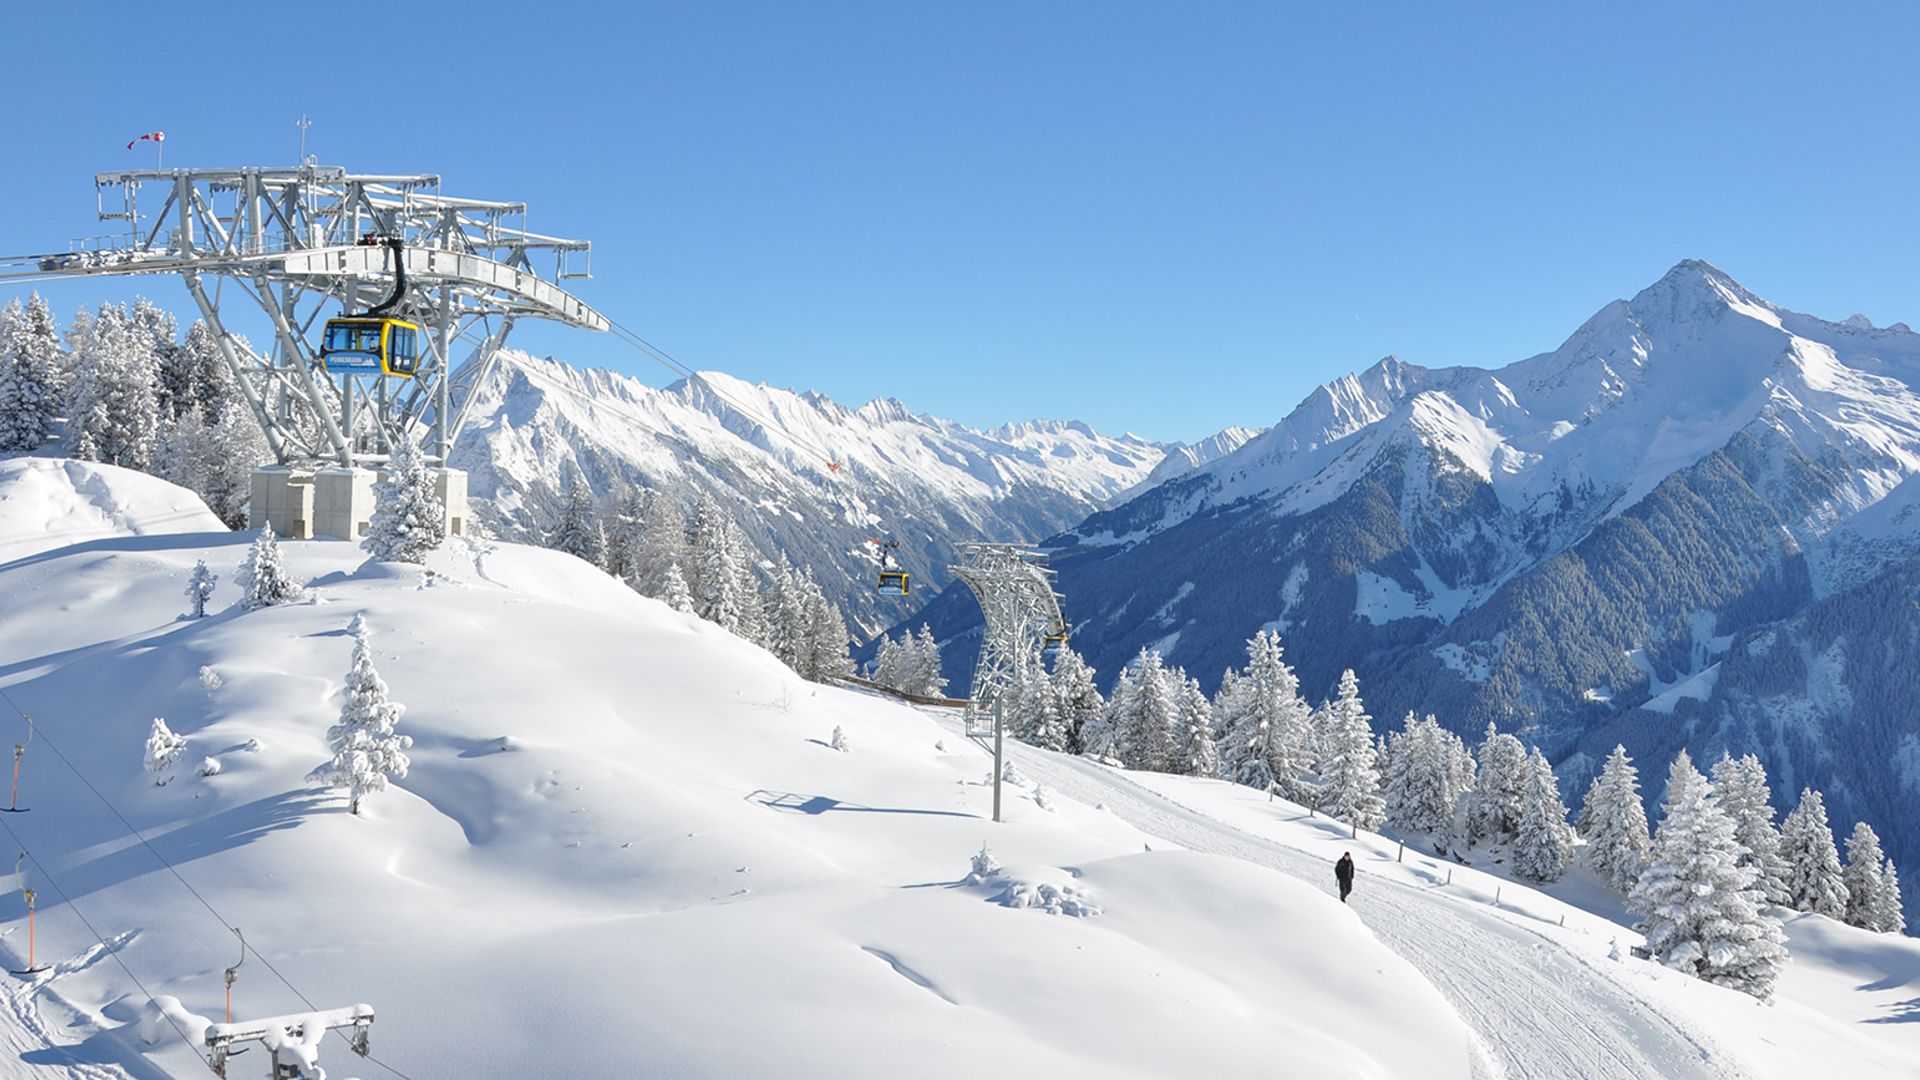 WinterHiking on the mountain in the Zillertal Valley